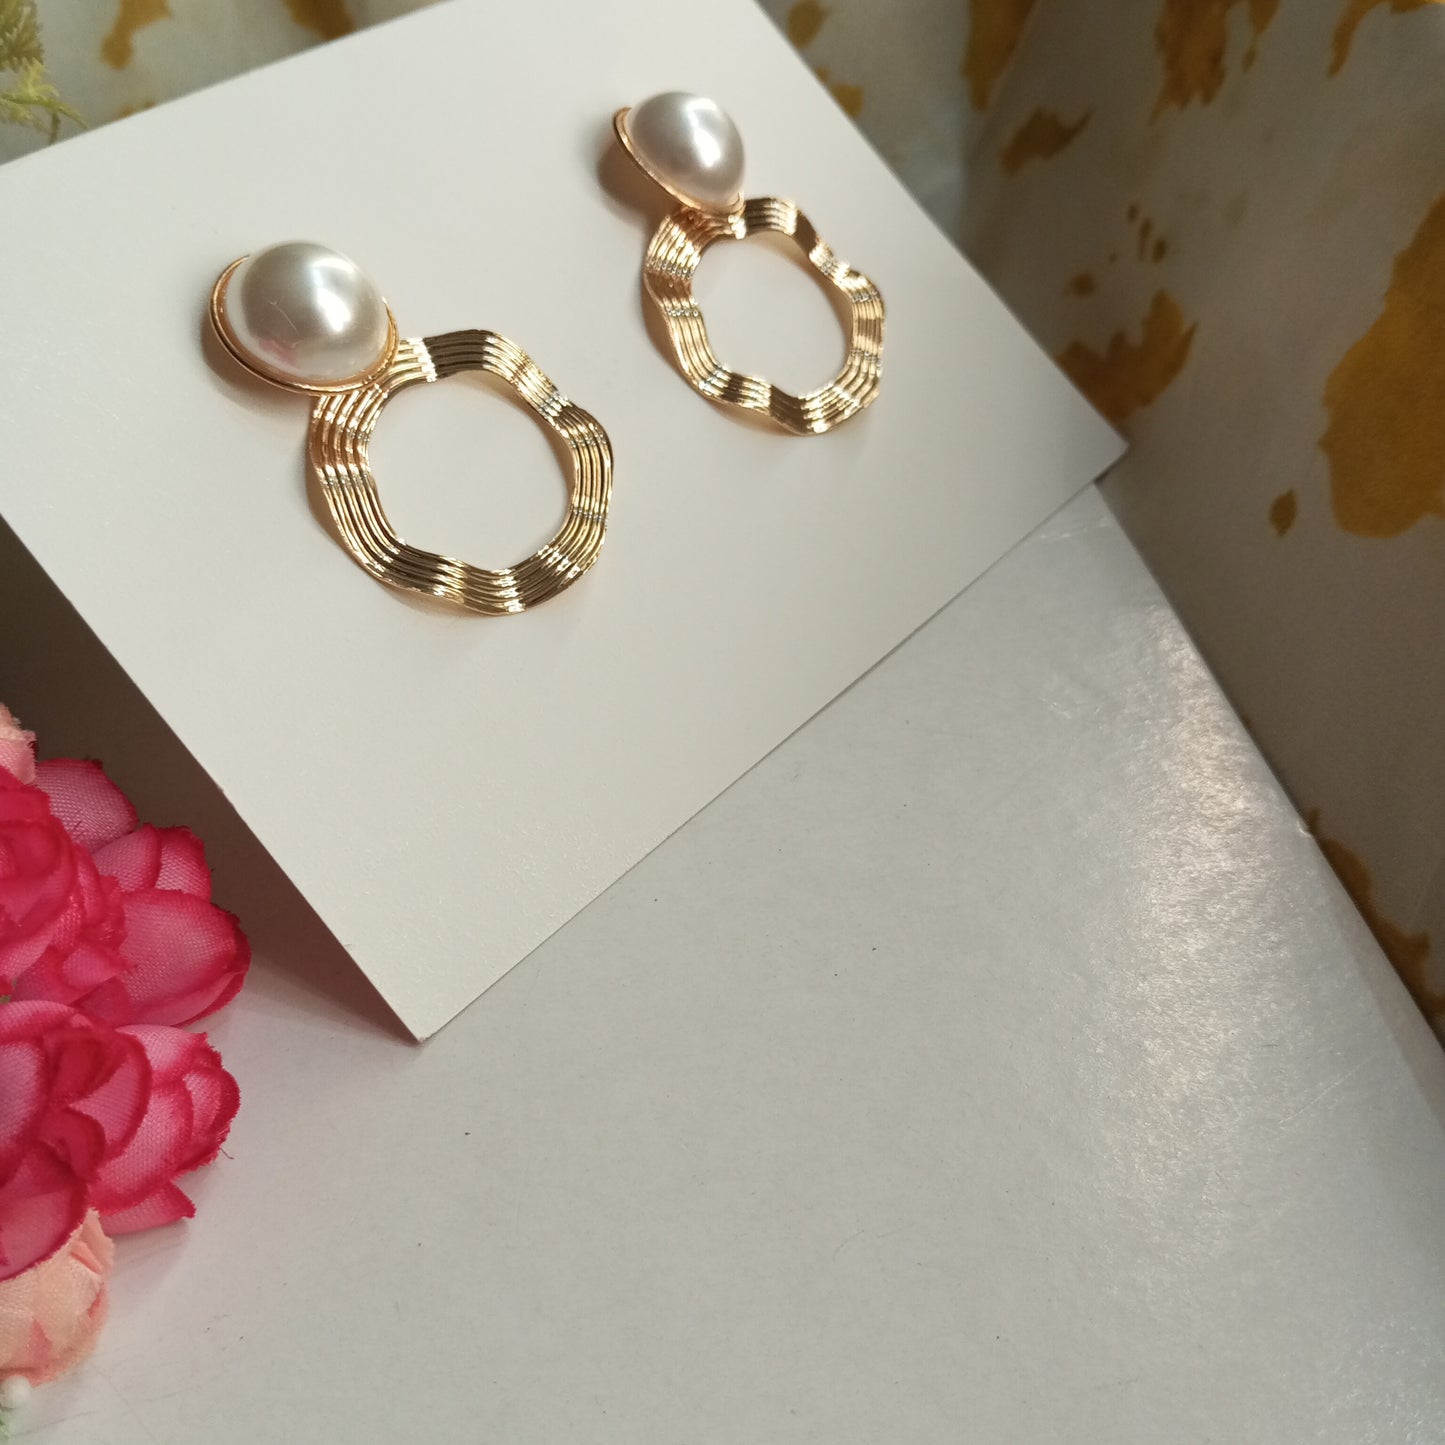 Spiral Contemporary Drop Earrings with Pearl Stud design